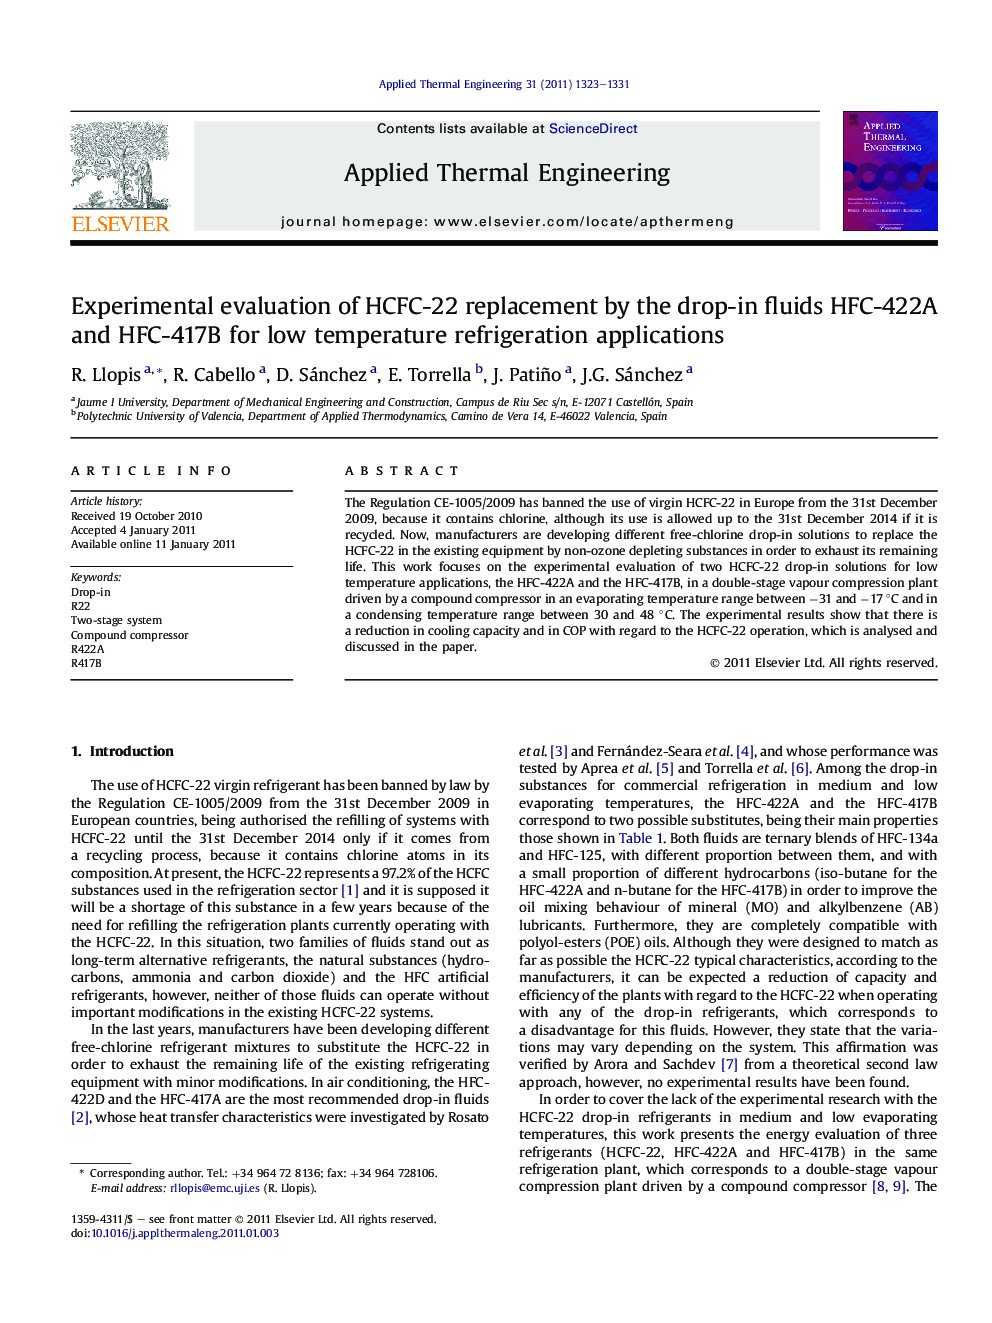 Experimental evaluation of HCFC-22 replacement by the drop-in fluids HFC-422A and HFC-417B for low temperature refrigeration applications